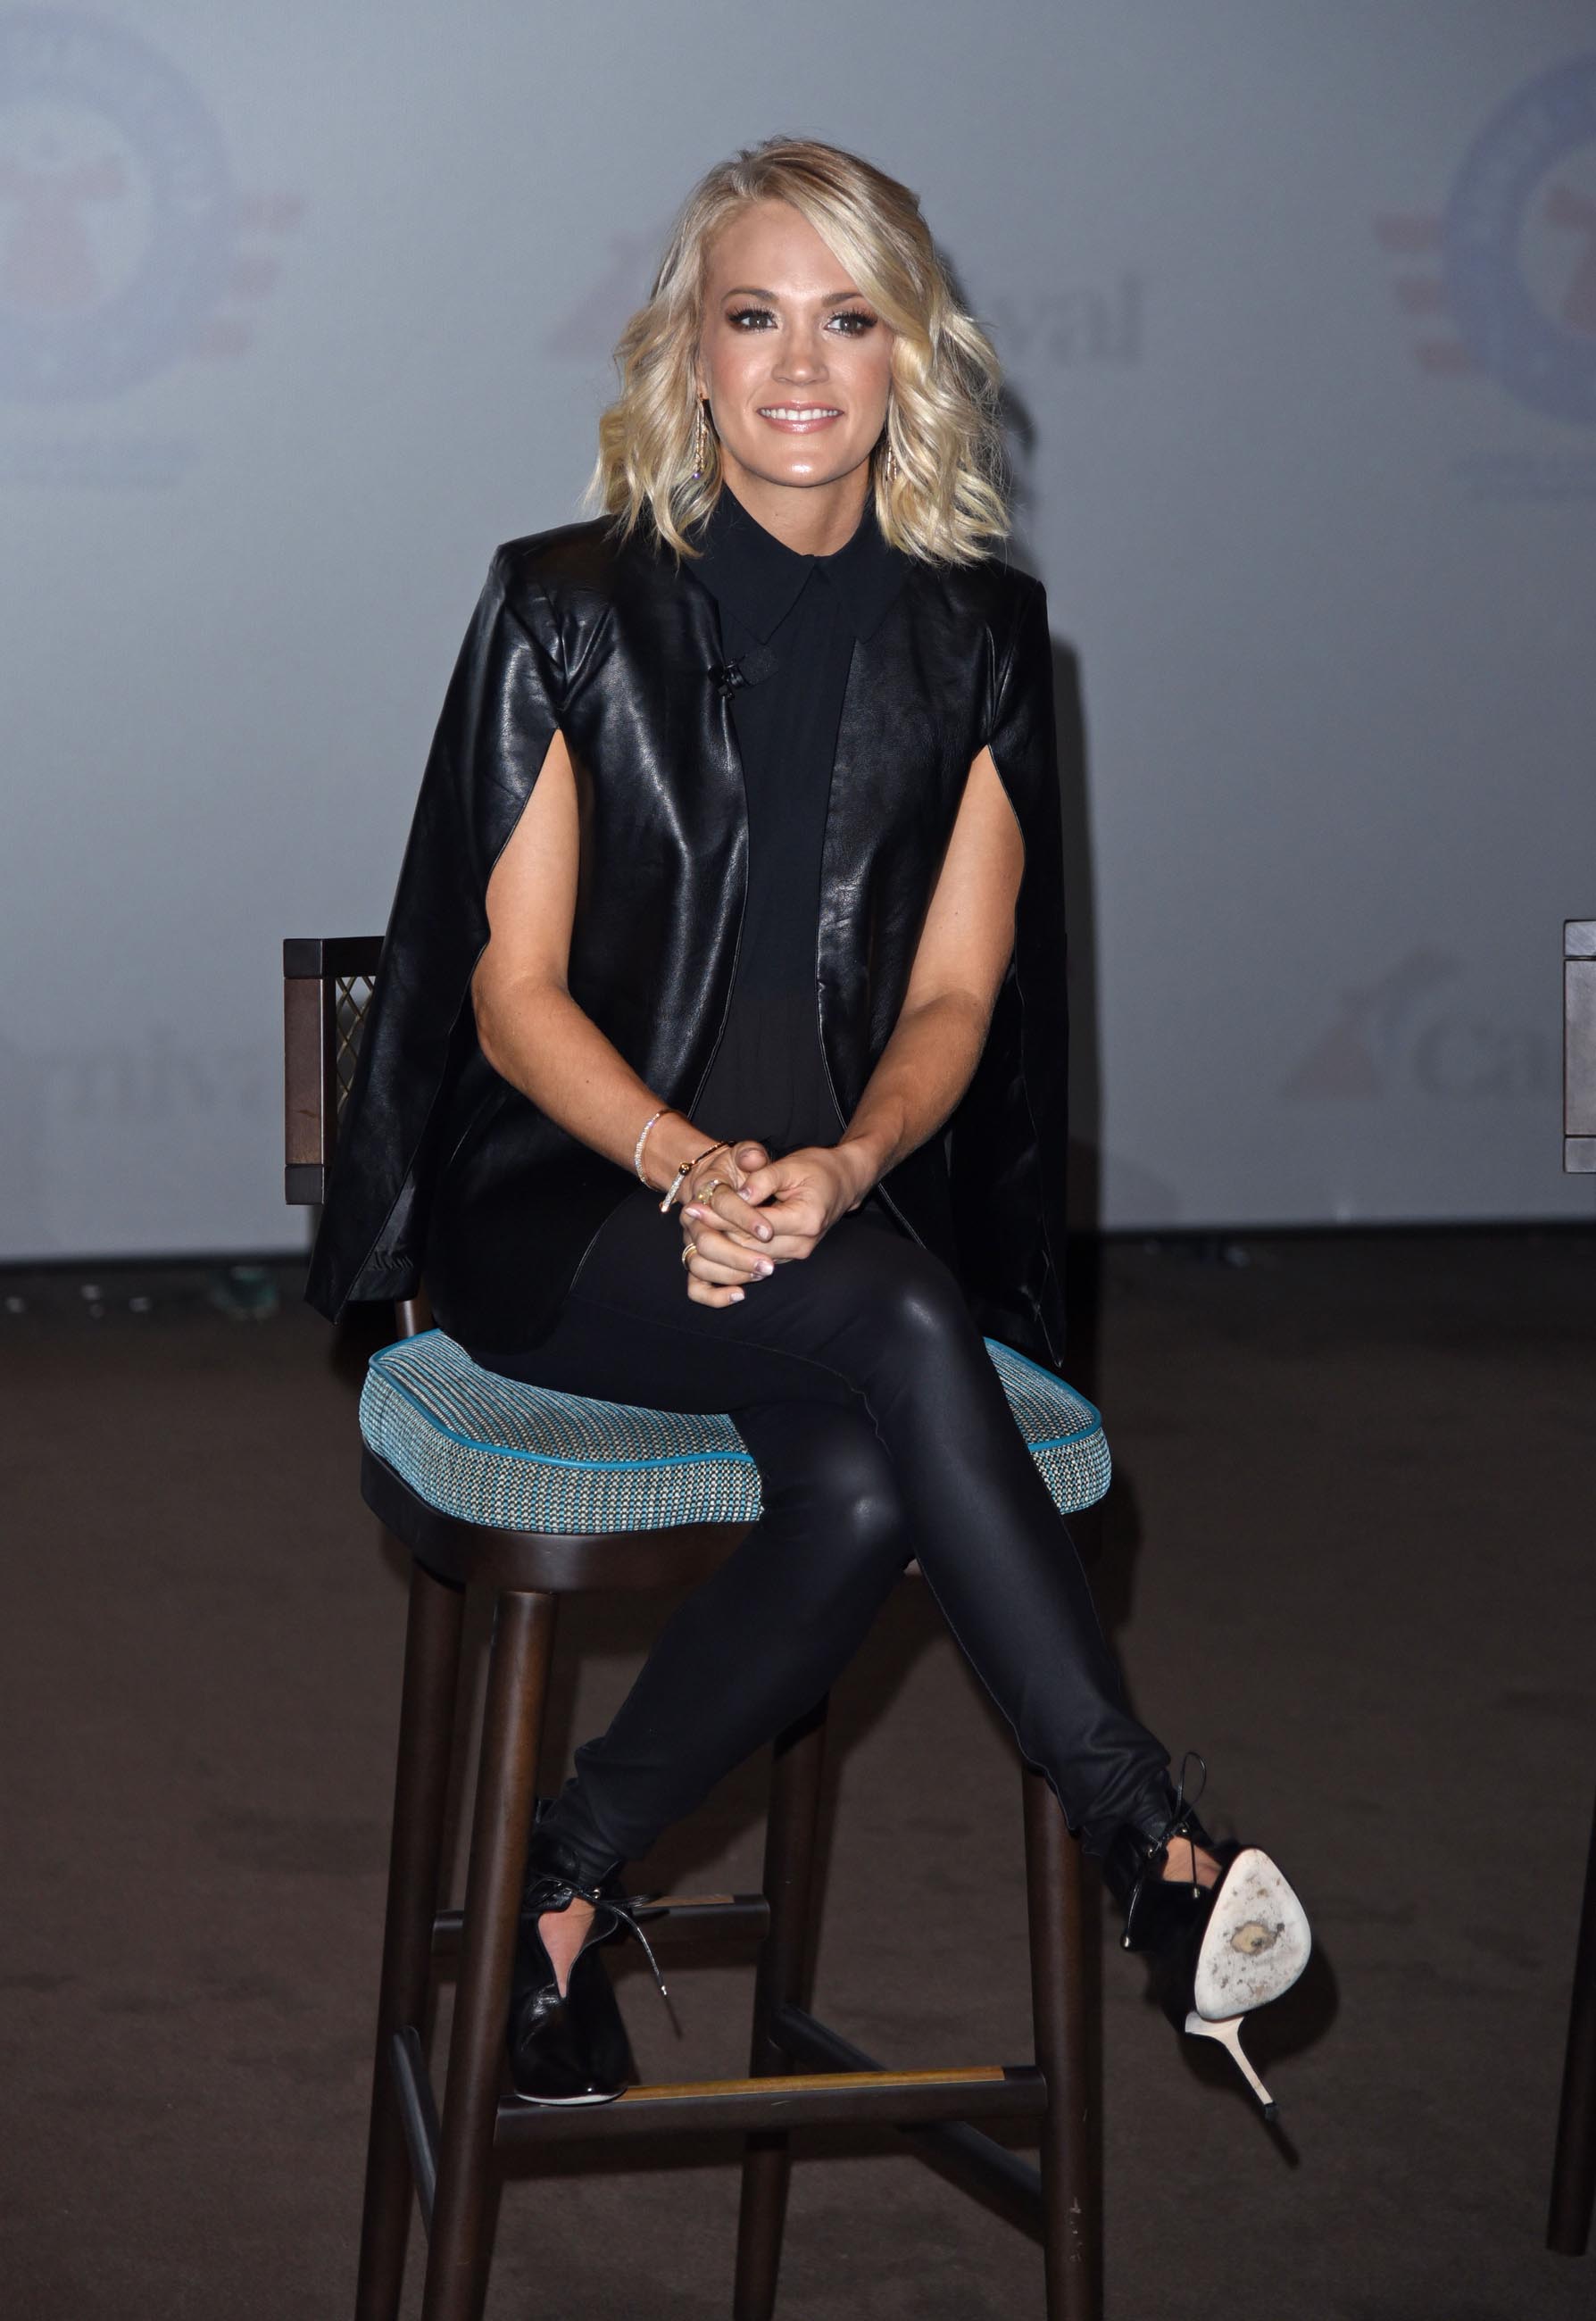 Carrie Underwood attends Carnival Vista Cruise Ships Port